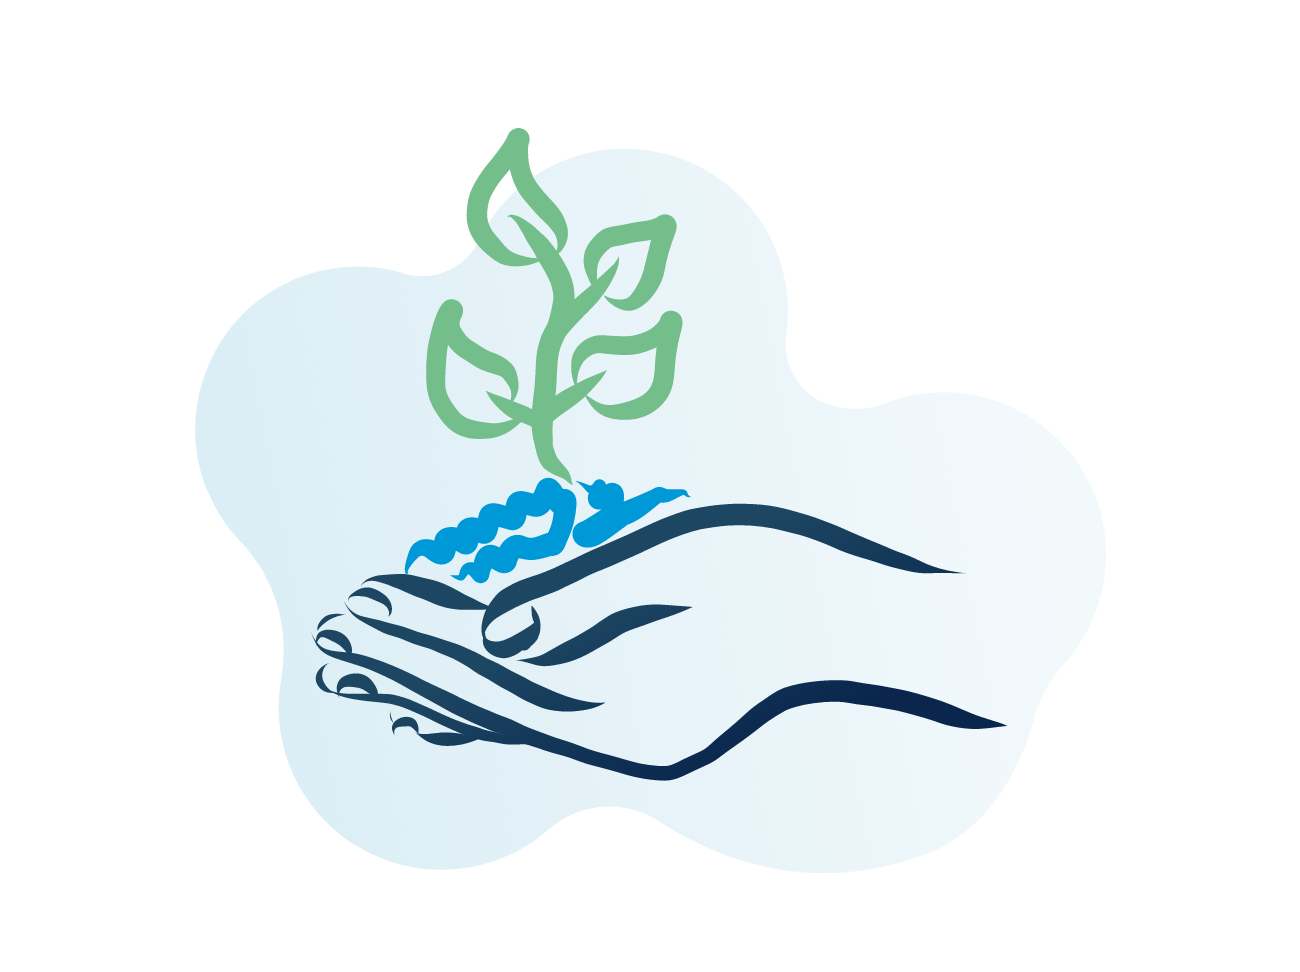 Drawing of hands holding a growing plant